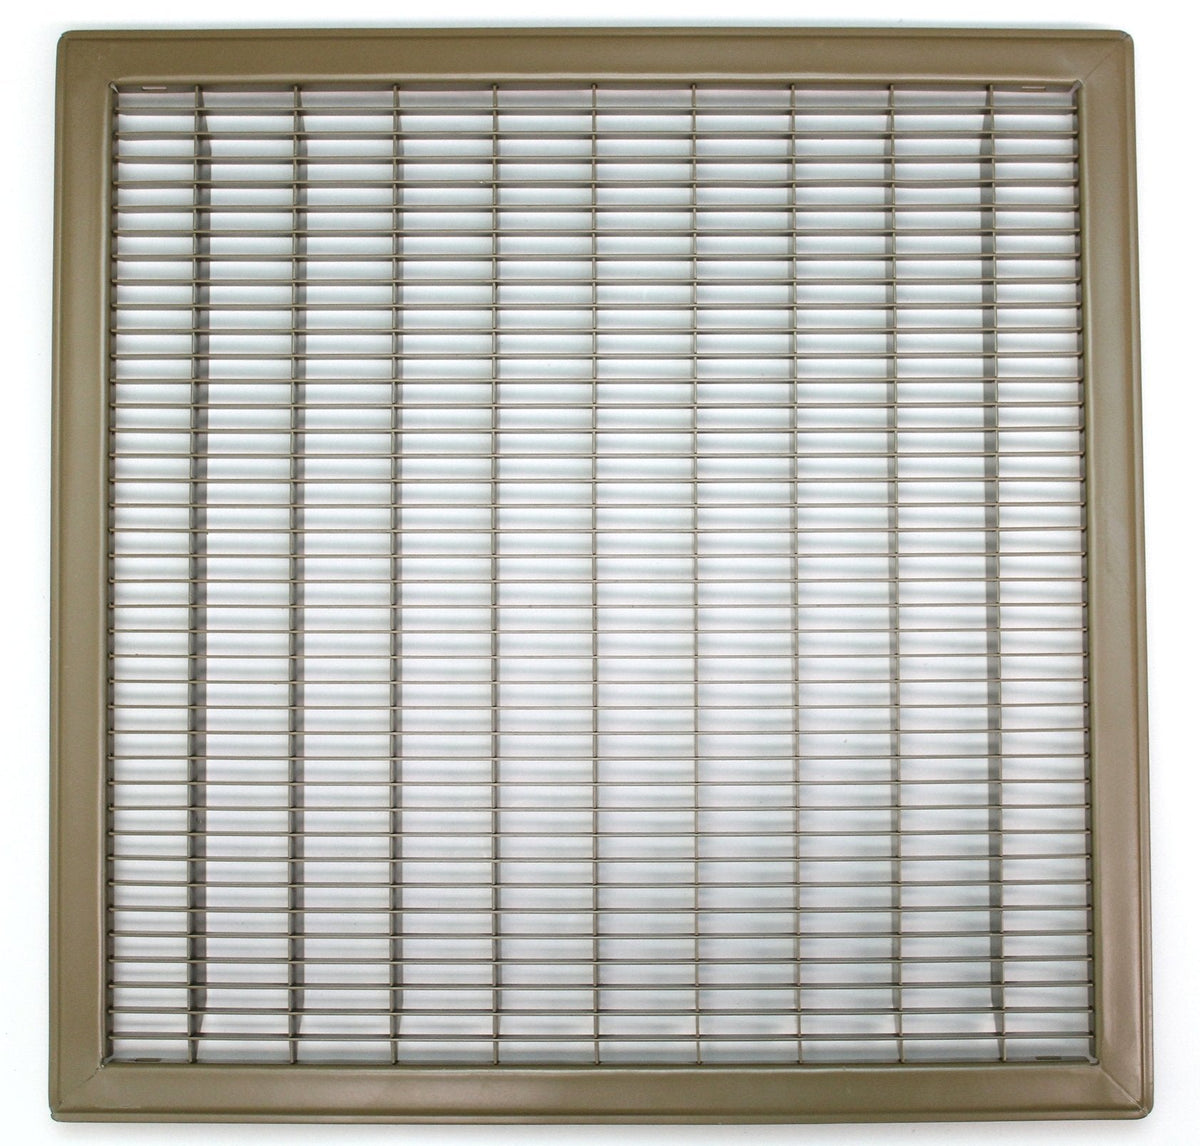 20&quot; X 26&quot; Or 26&quot; X 20&quot; Heavy Duty Floor Grille - Fixed Blades Air Grille - Brown [Outer Dimensions: 21.75 X 27.75]